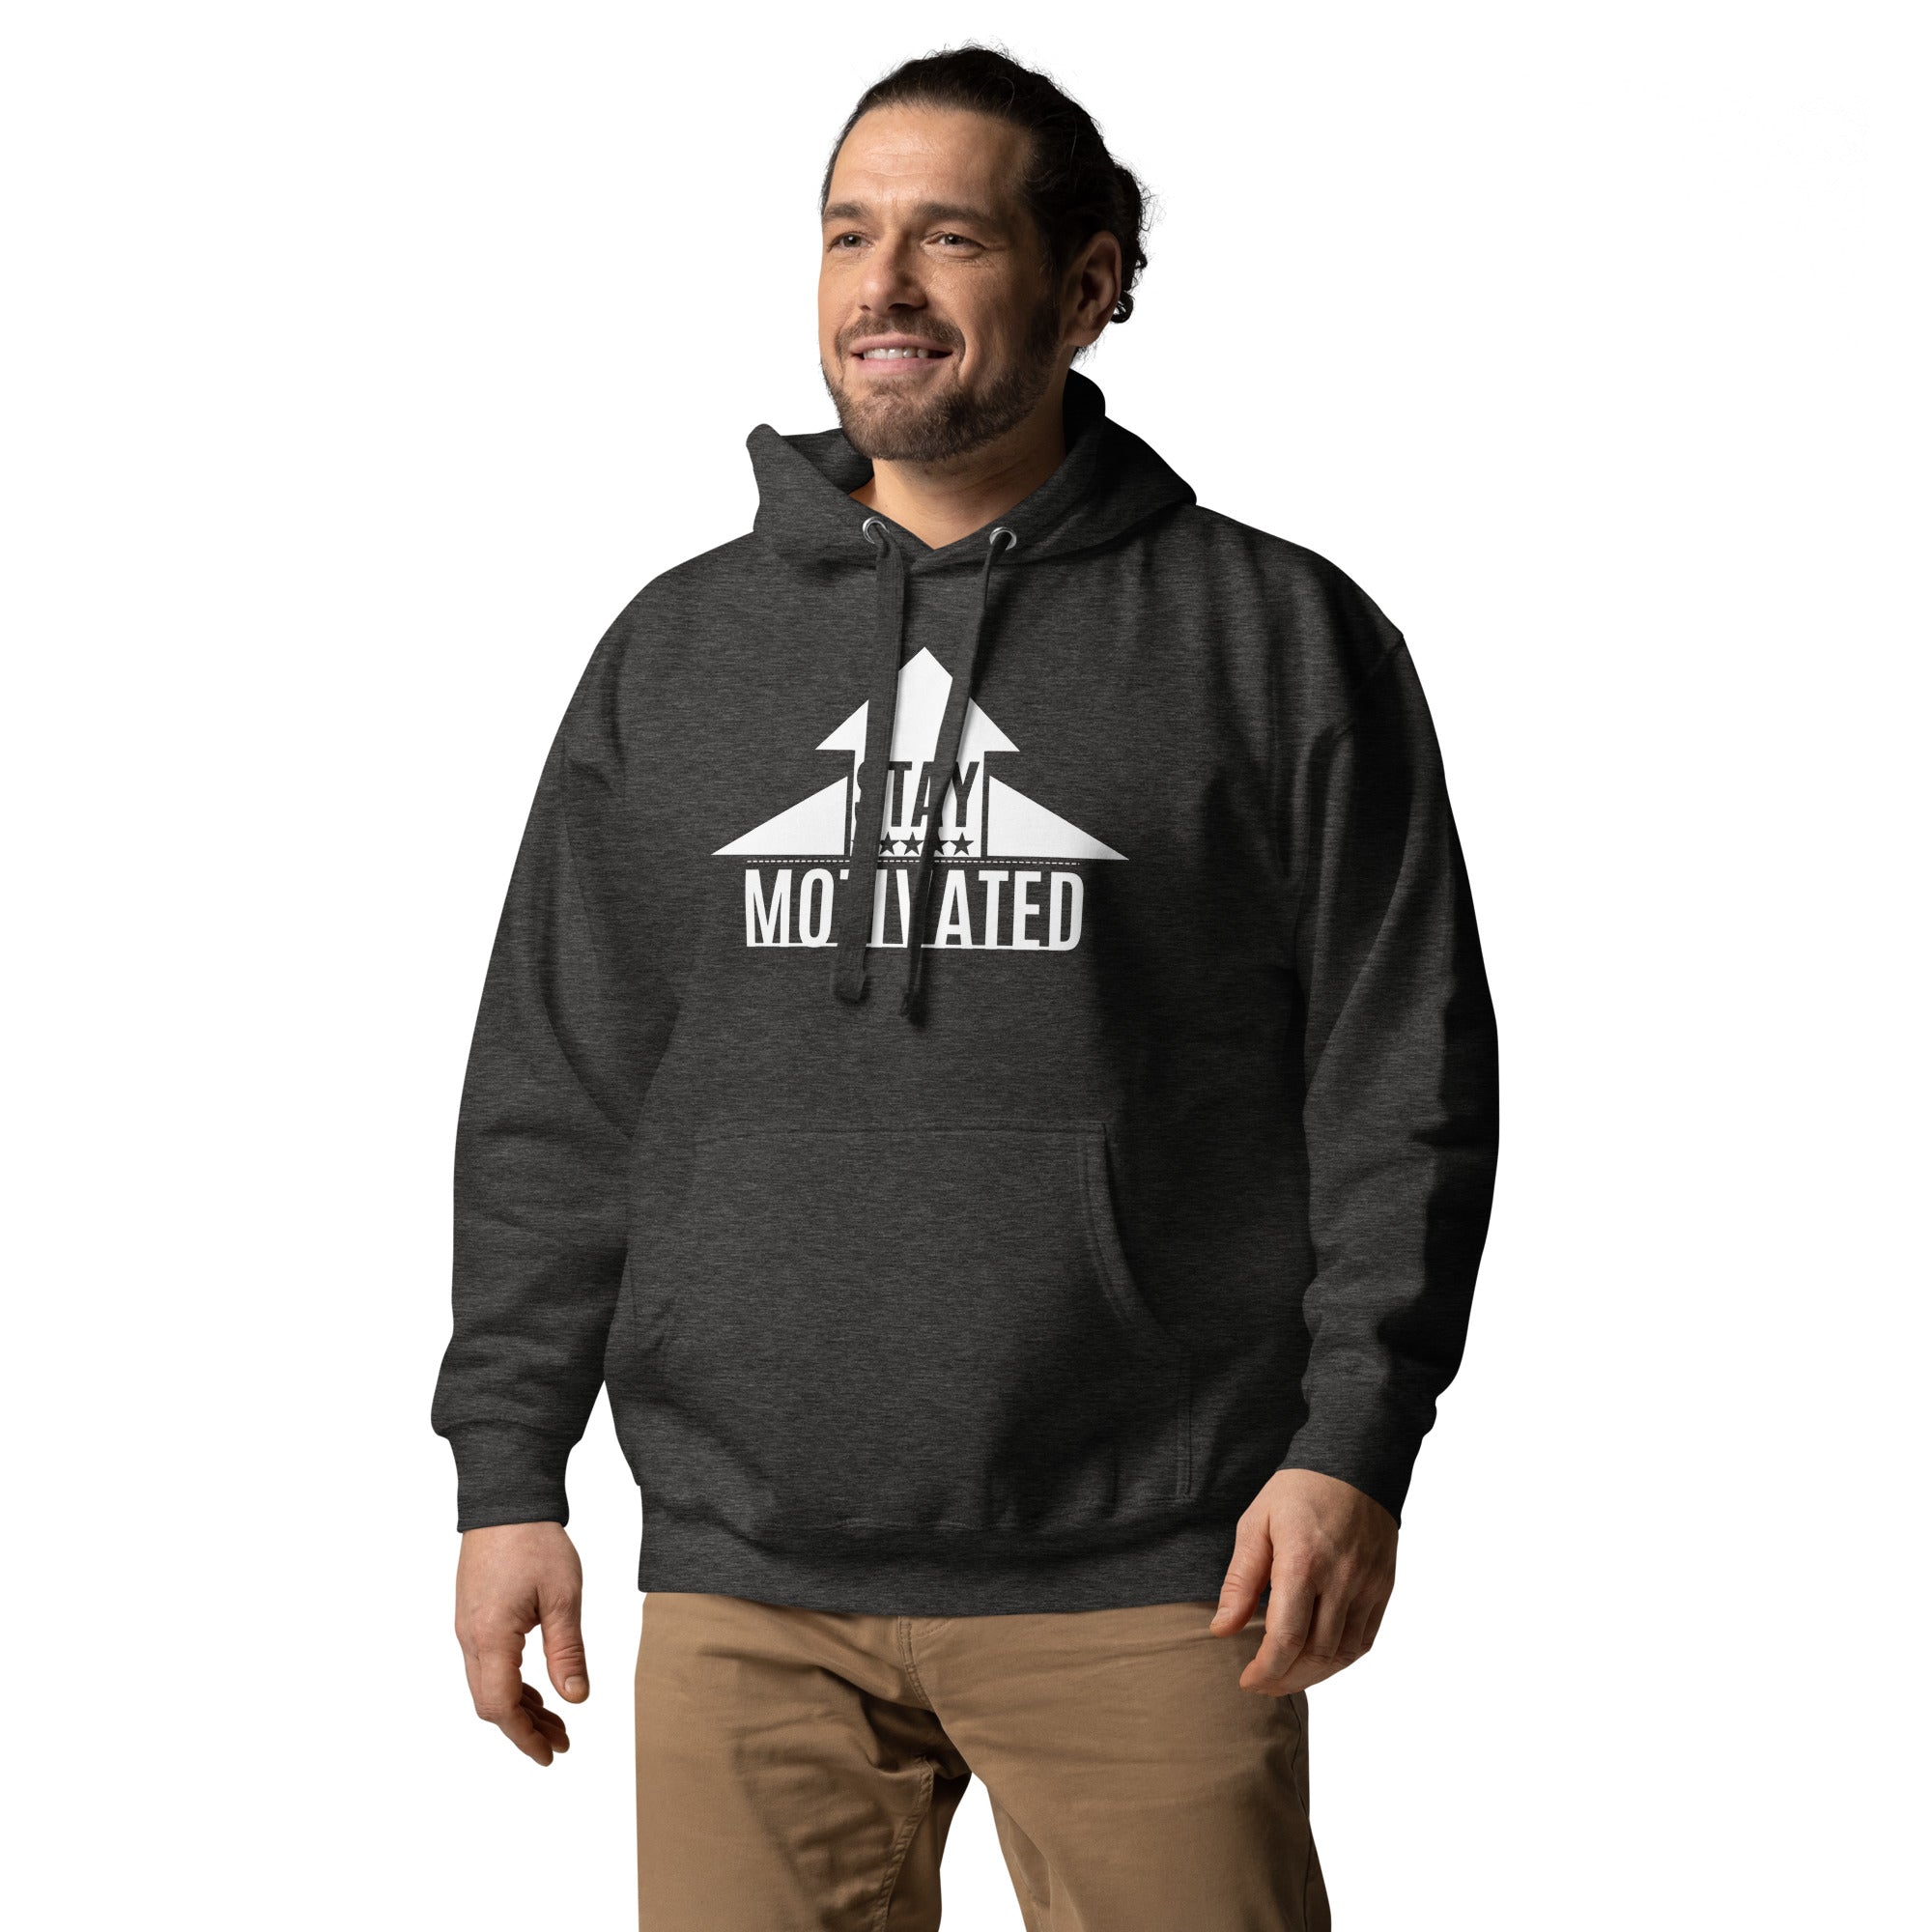 Stay Motivated Unisex Hoodie